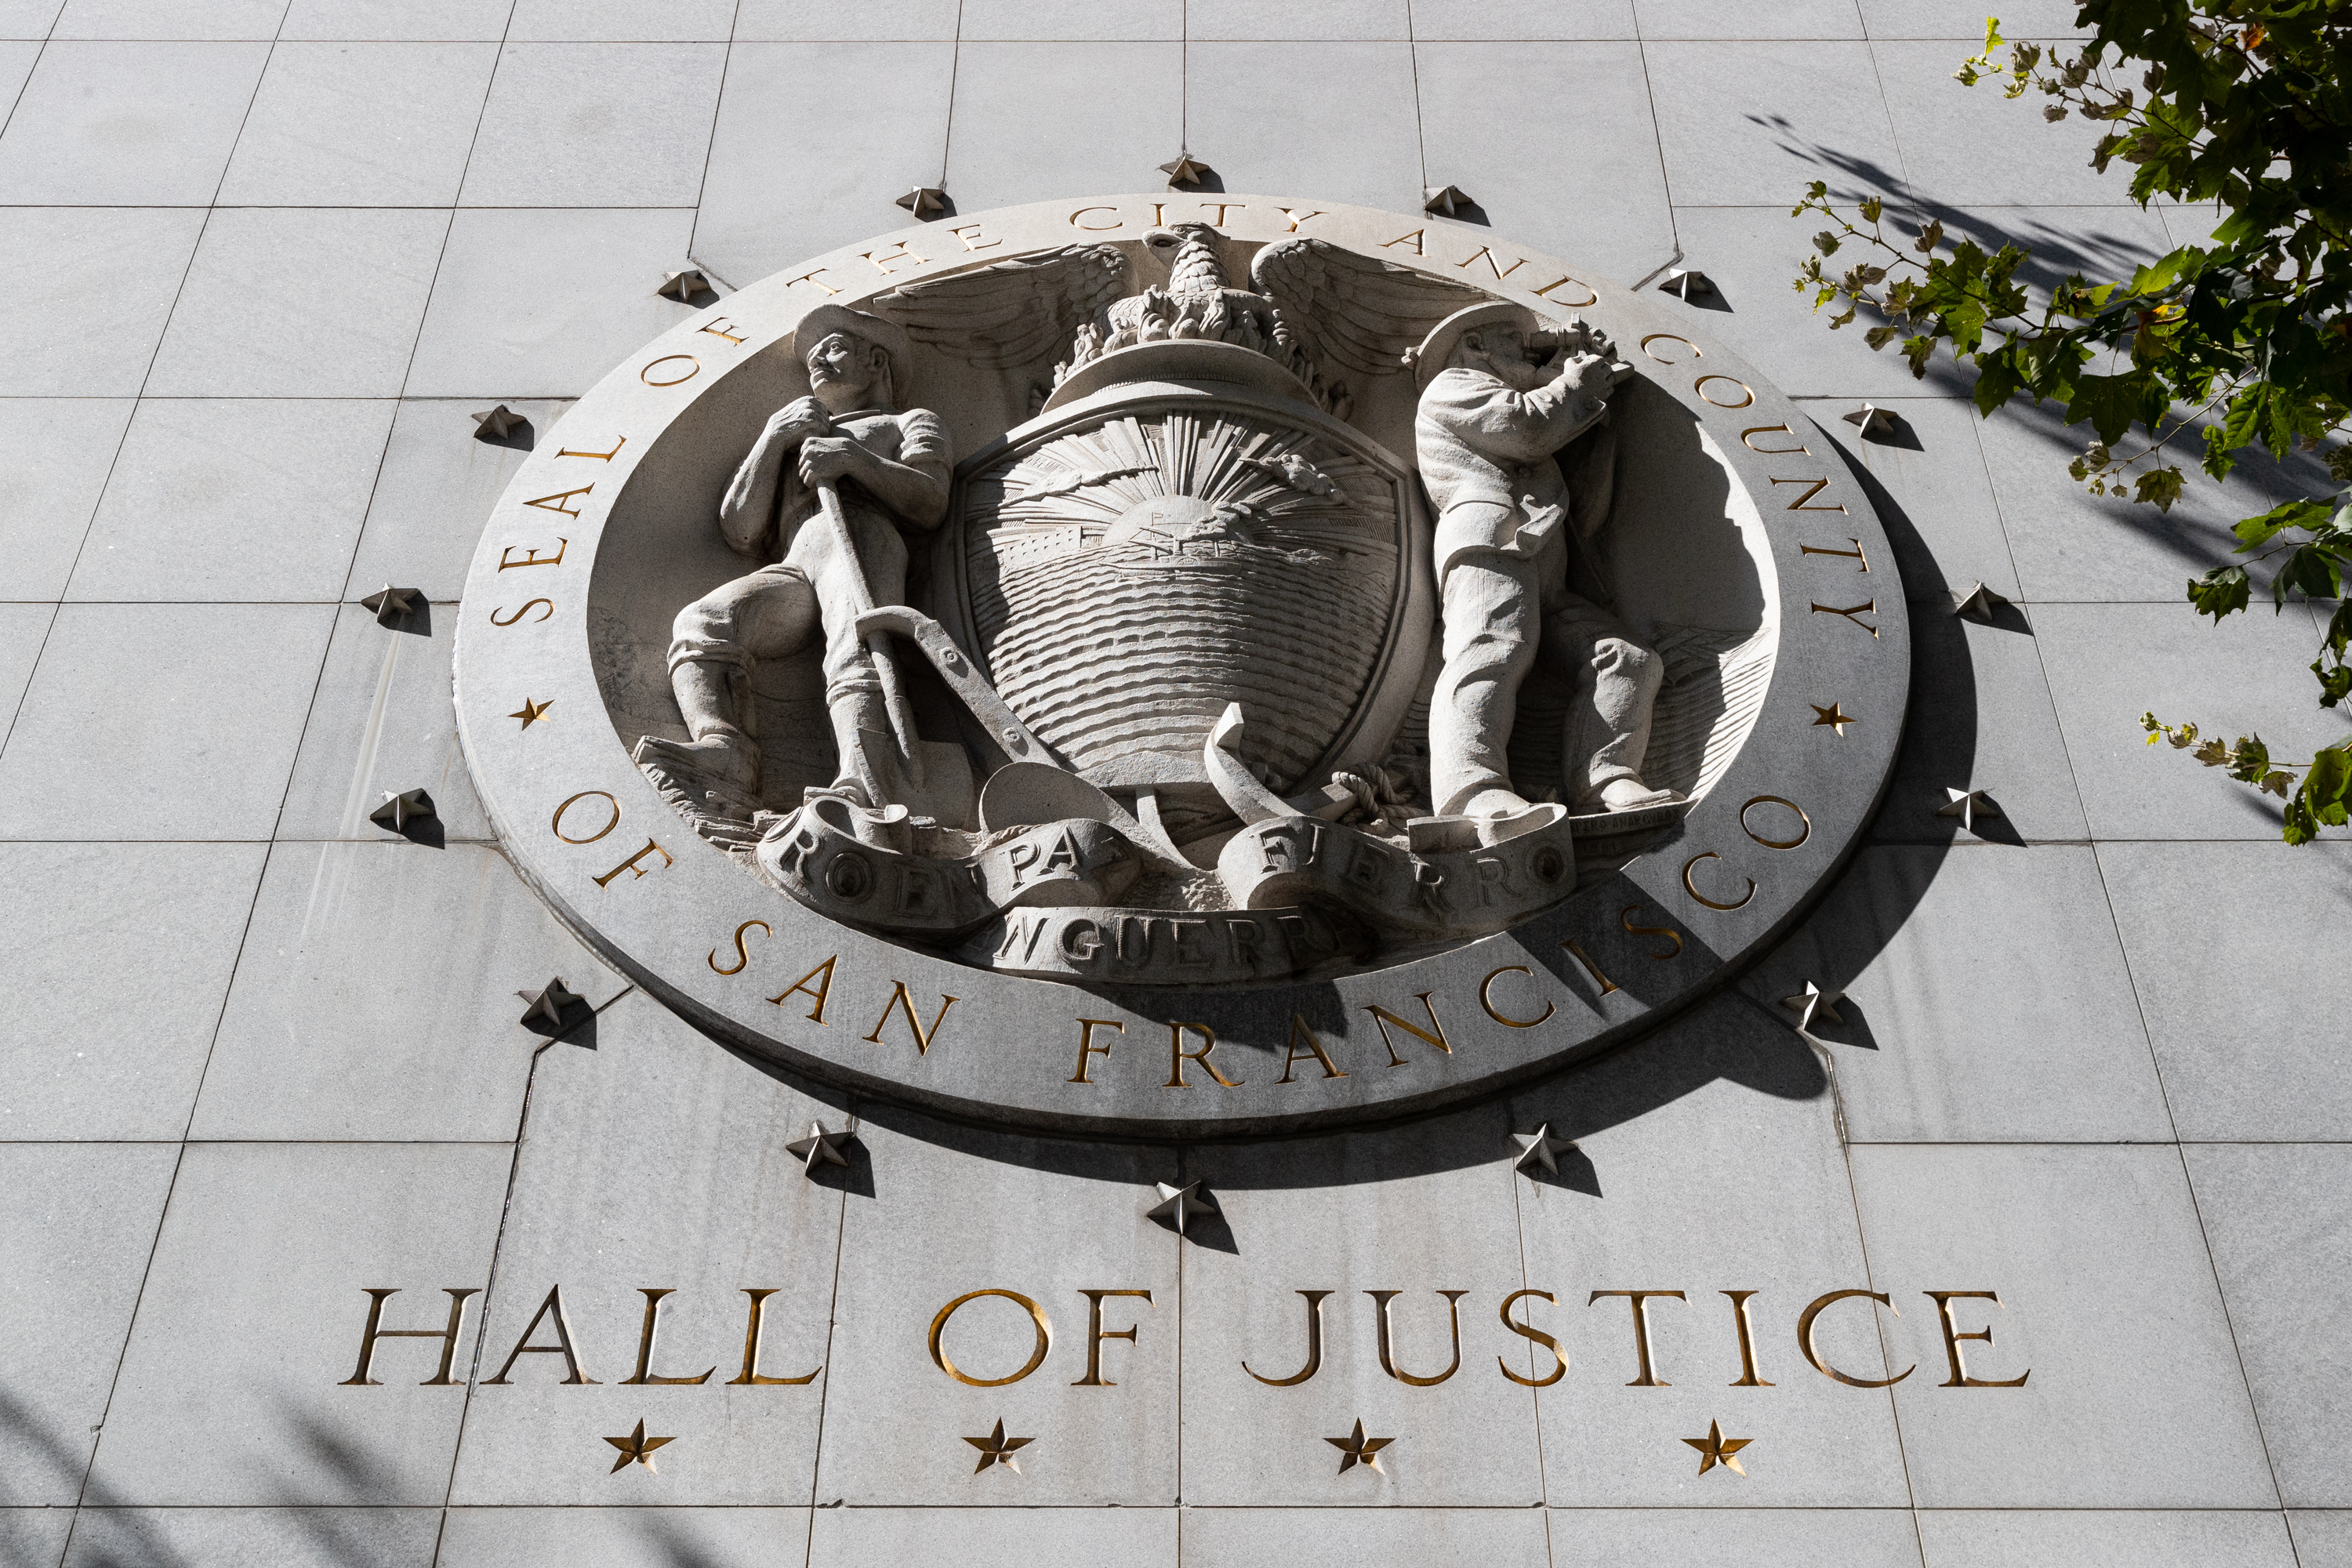 bas relief of Hall of Justice sign